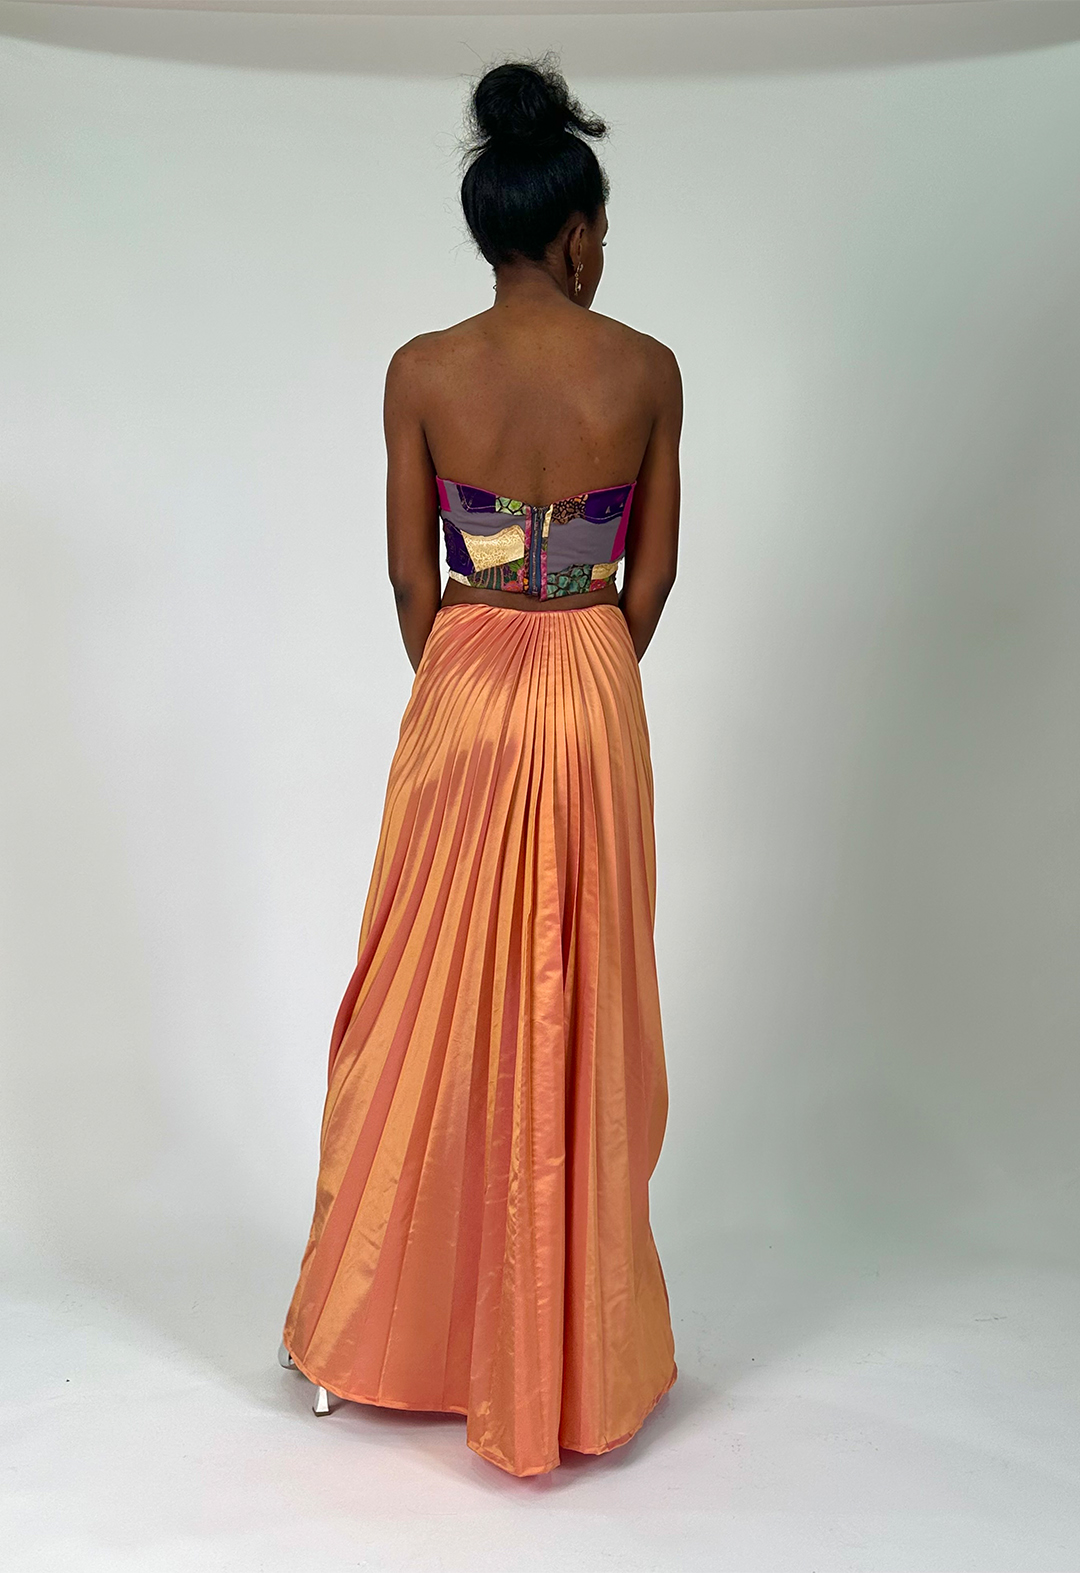 Model’s back is facing the camera, showcasing the concentration of pleats in the back of skirt and the lower back's slight V-closure of the bodice.